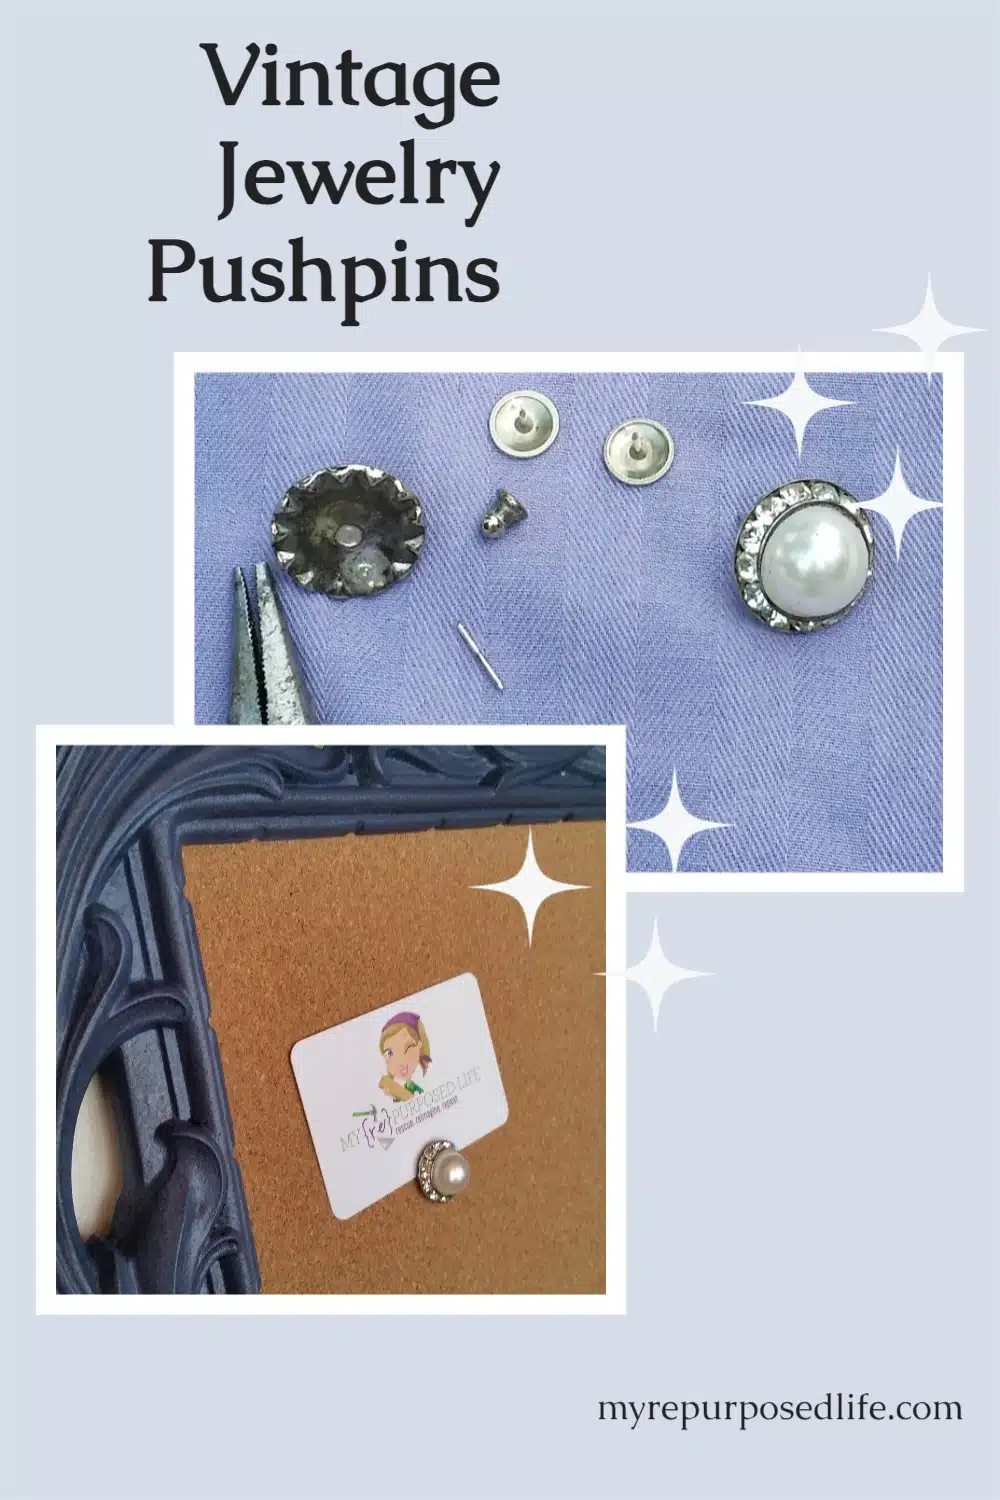 How to make vintage jewelry pushpins for your fancy memo cork board. Easy project to do with estate jewelry or granny's old earrings. #MyRepurposedLife #upcycle #vintage #jewelry #pushpin #project via @repurposedlife